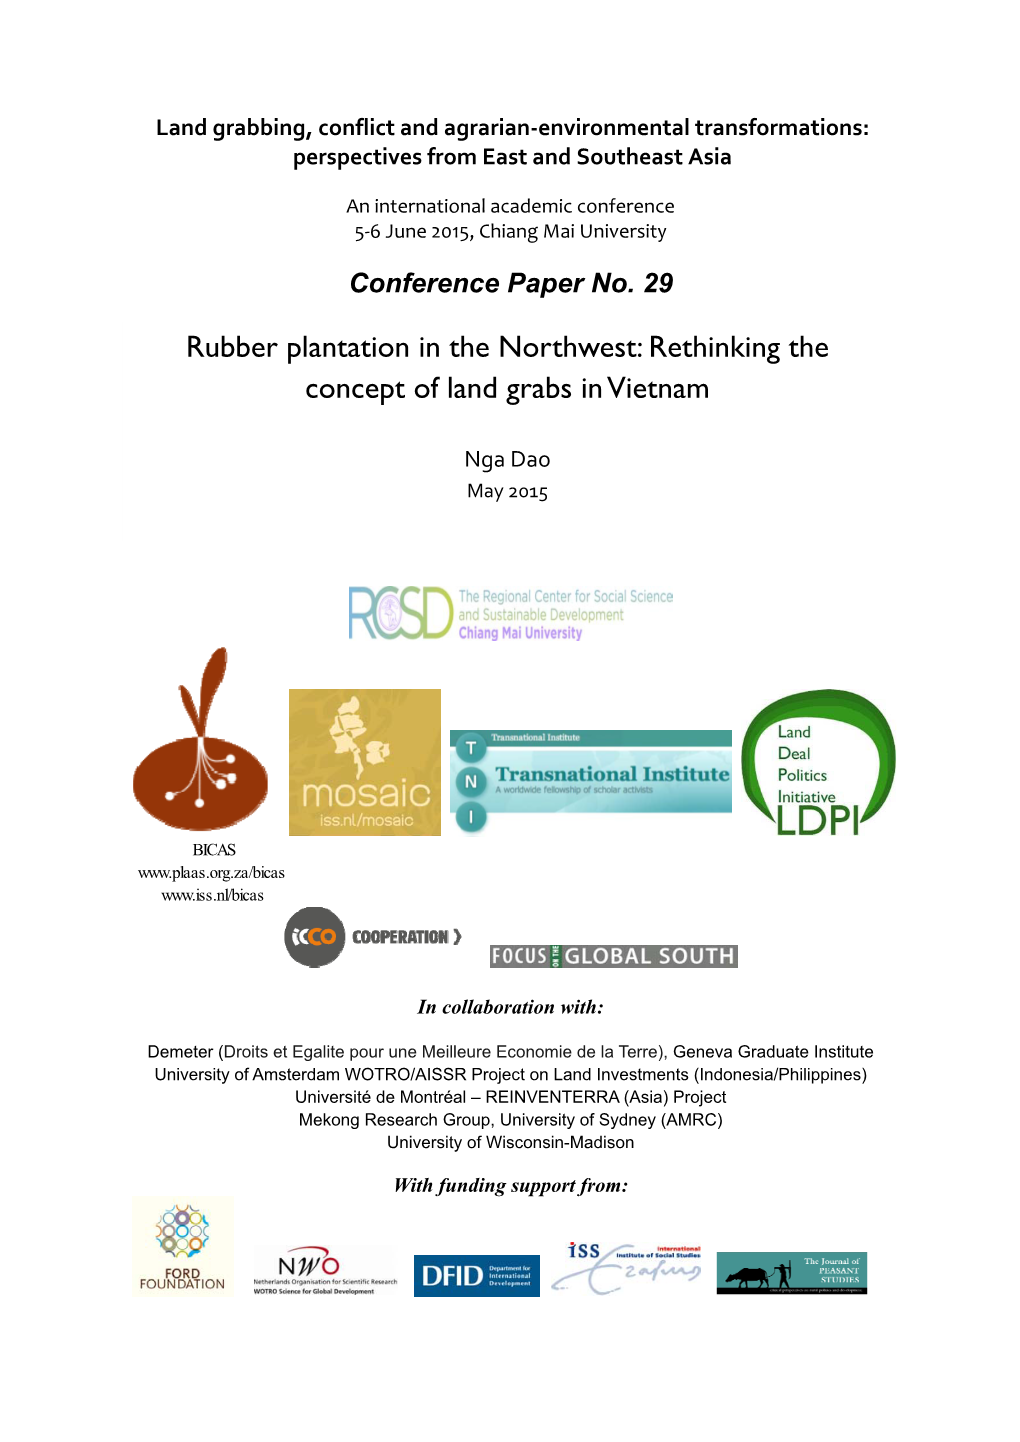 Rubber Plantation in the Northwest: Rethinking the Concept of Land Grabs in Vietnam